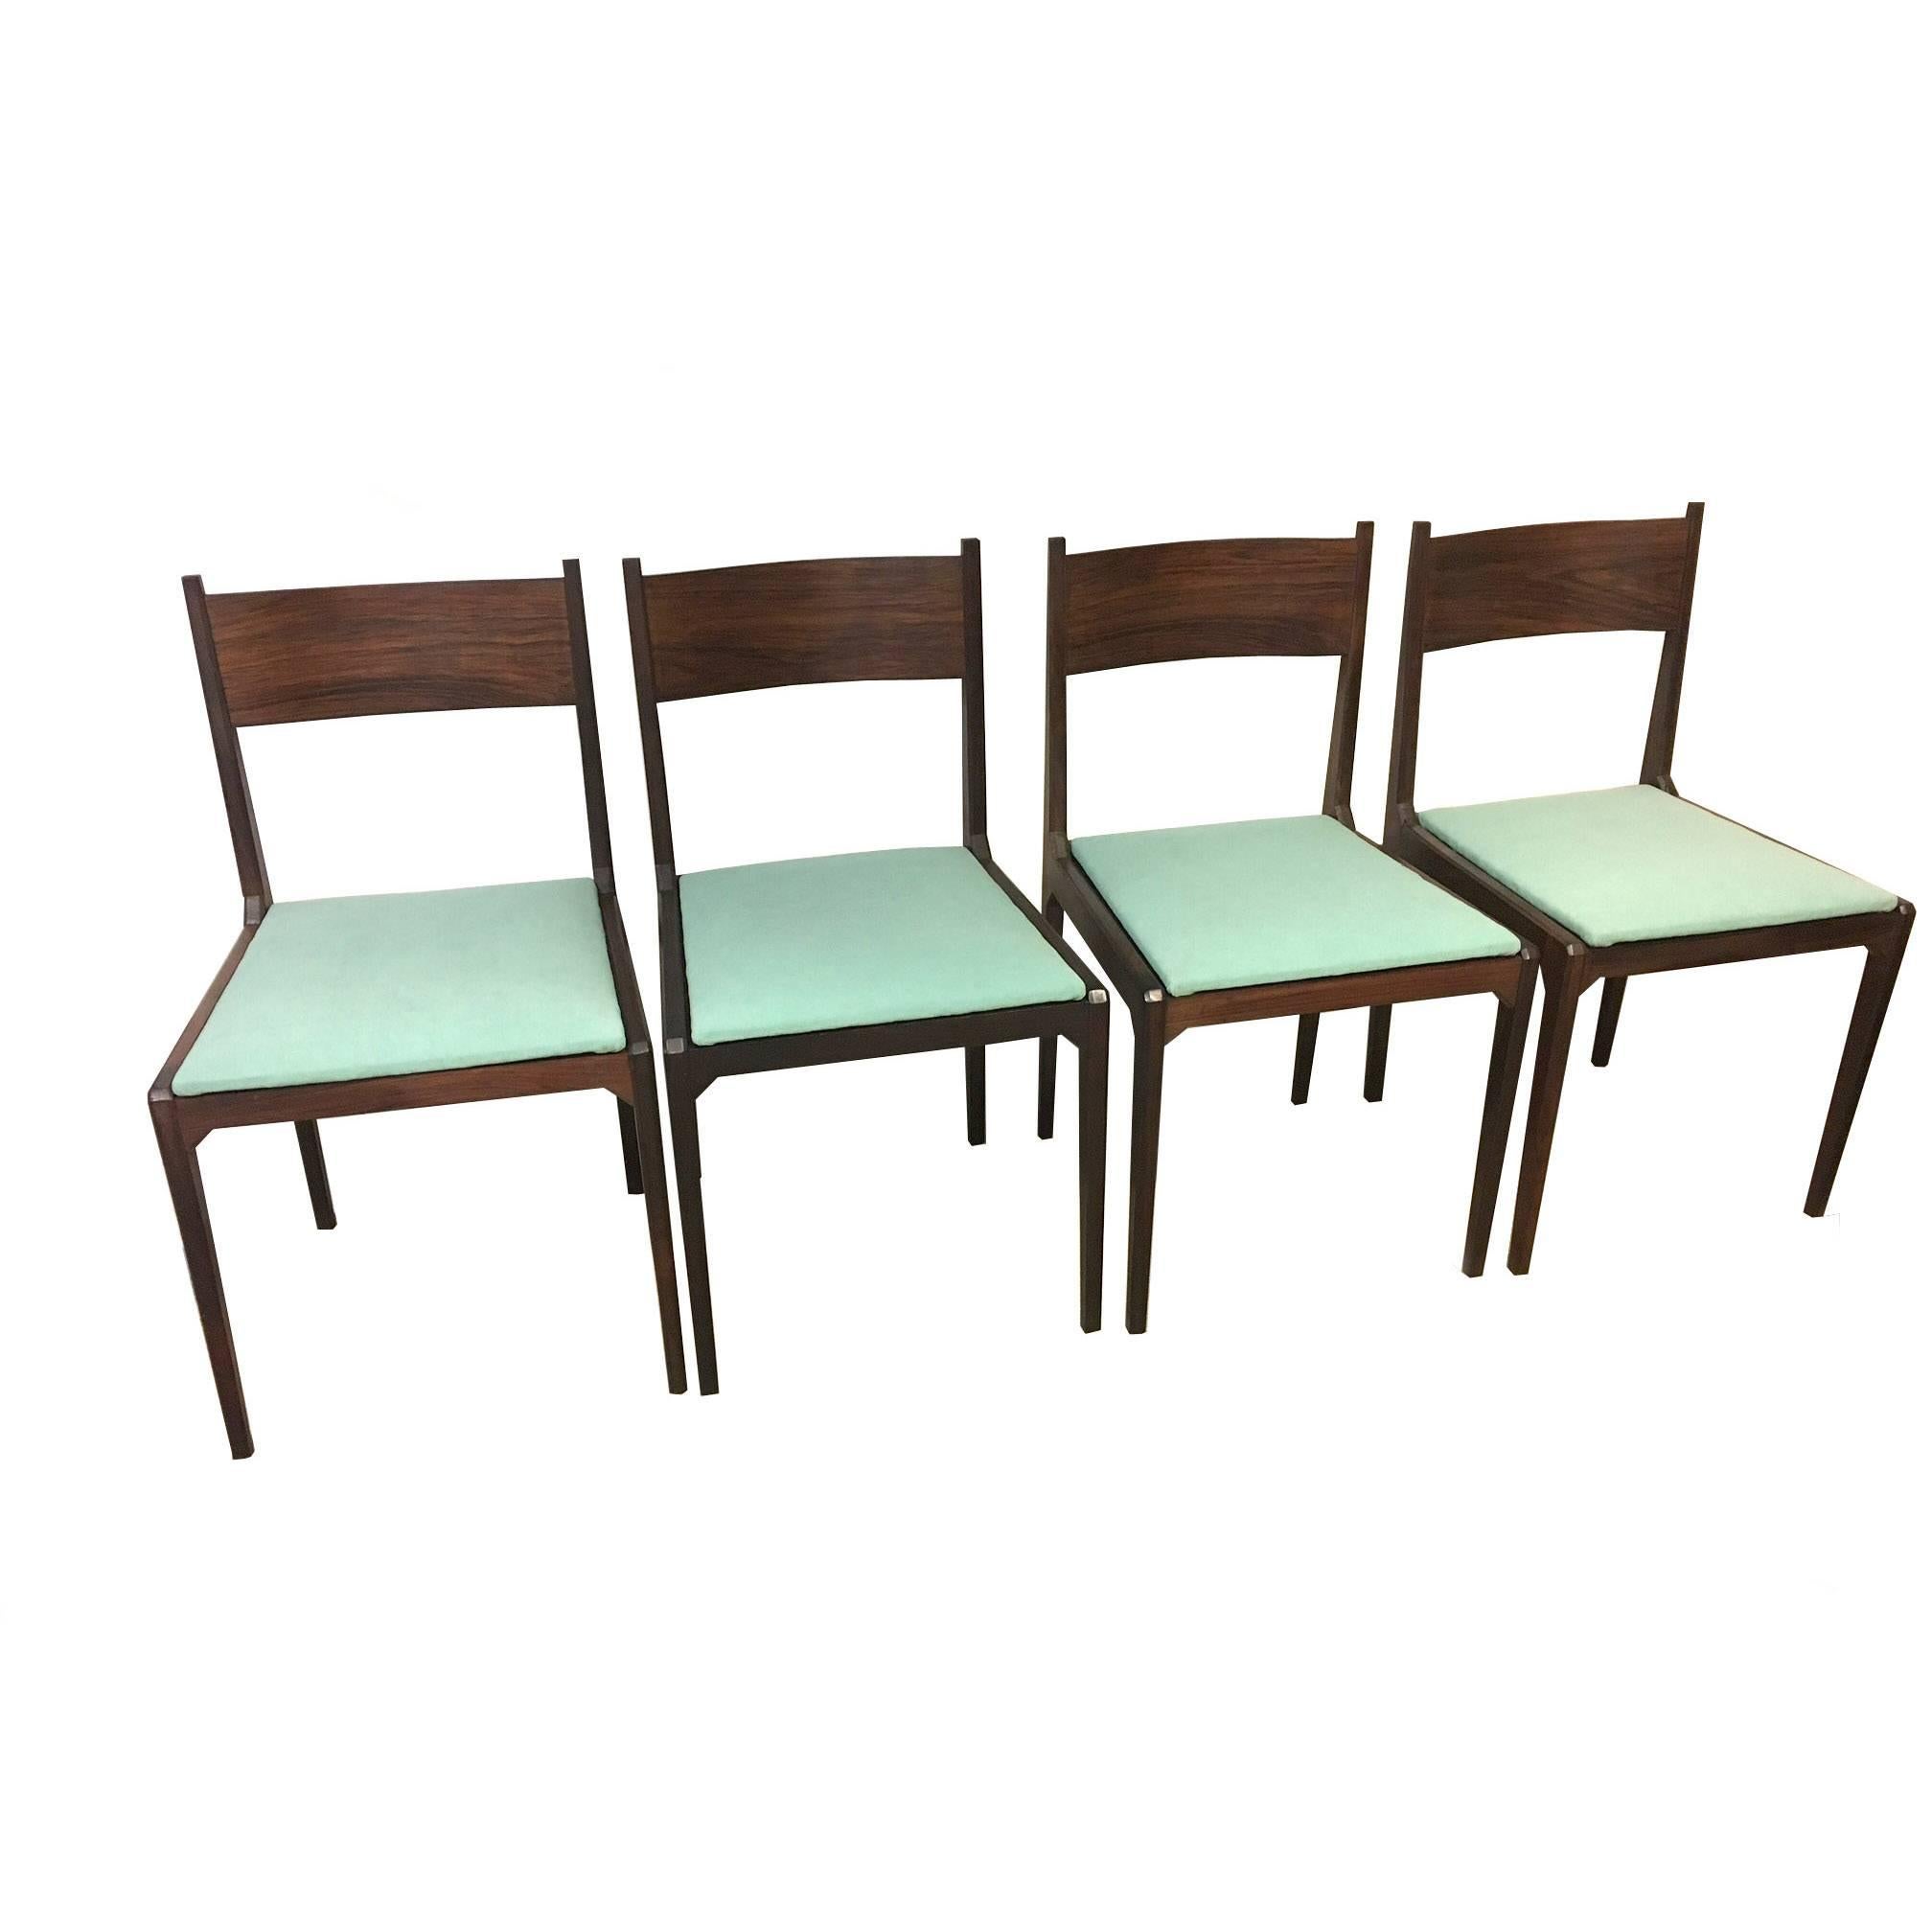 Gio Ponti and Rosselli Rosewood and Green Fustian Italian Dining Chairs, 1959 